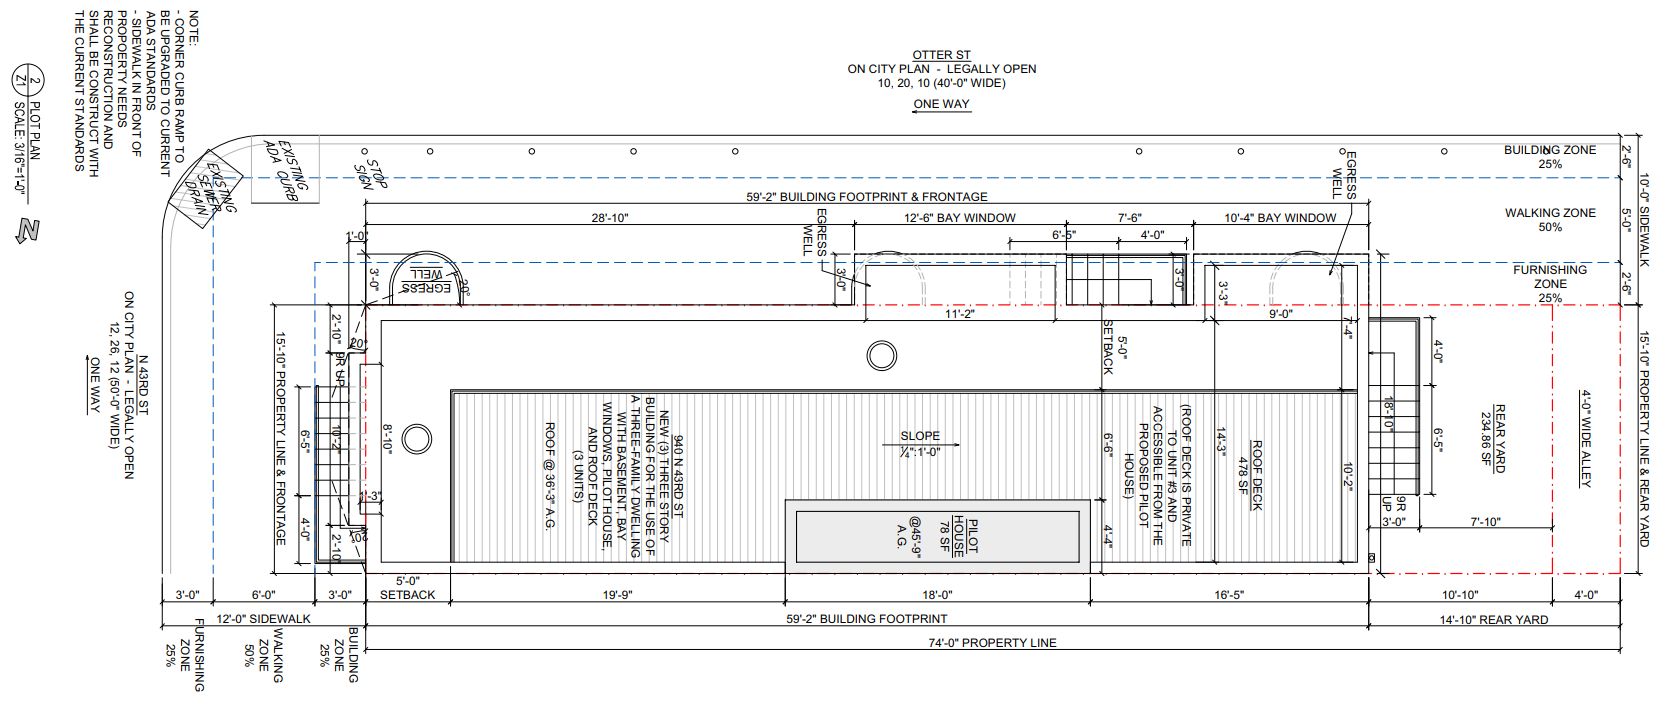 940 North 43rd Street. Site plan. Credit: JT Ran Expediting via the City of Philadelphia Department of Planning and Development